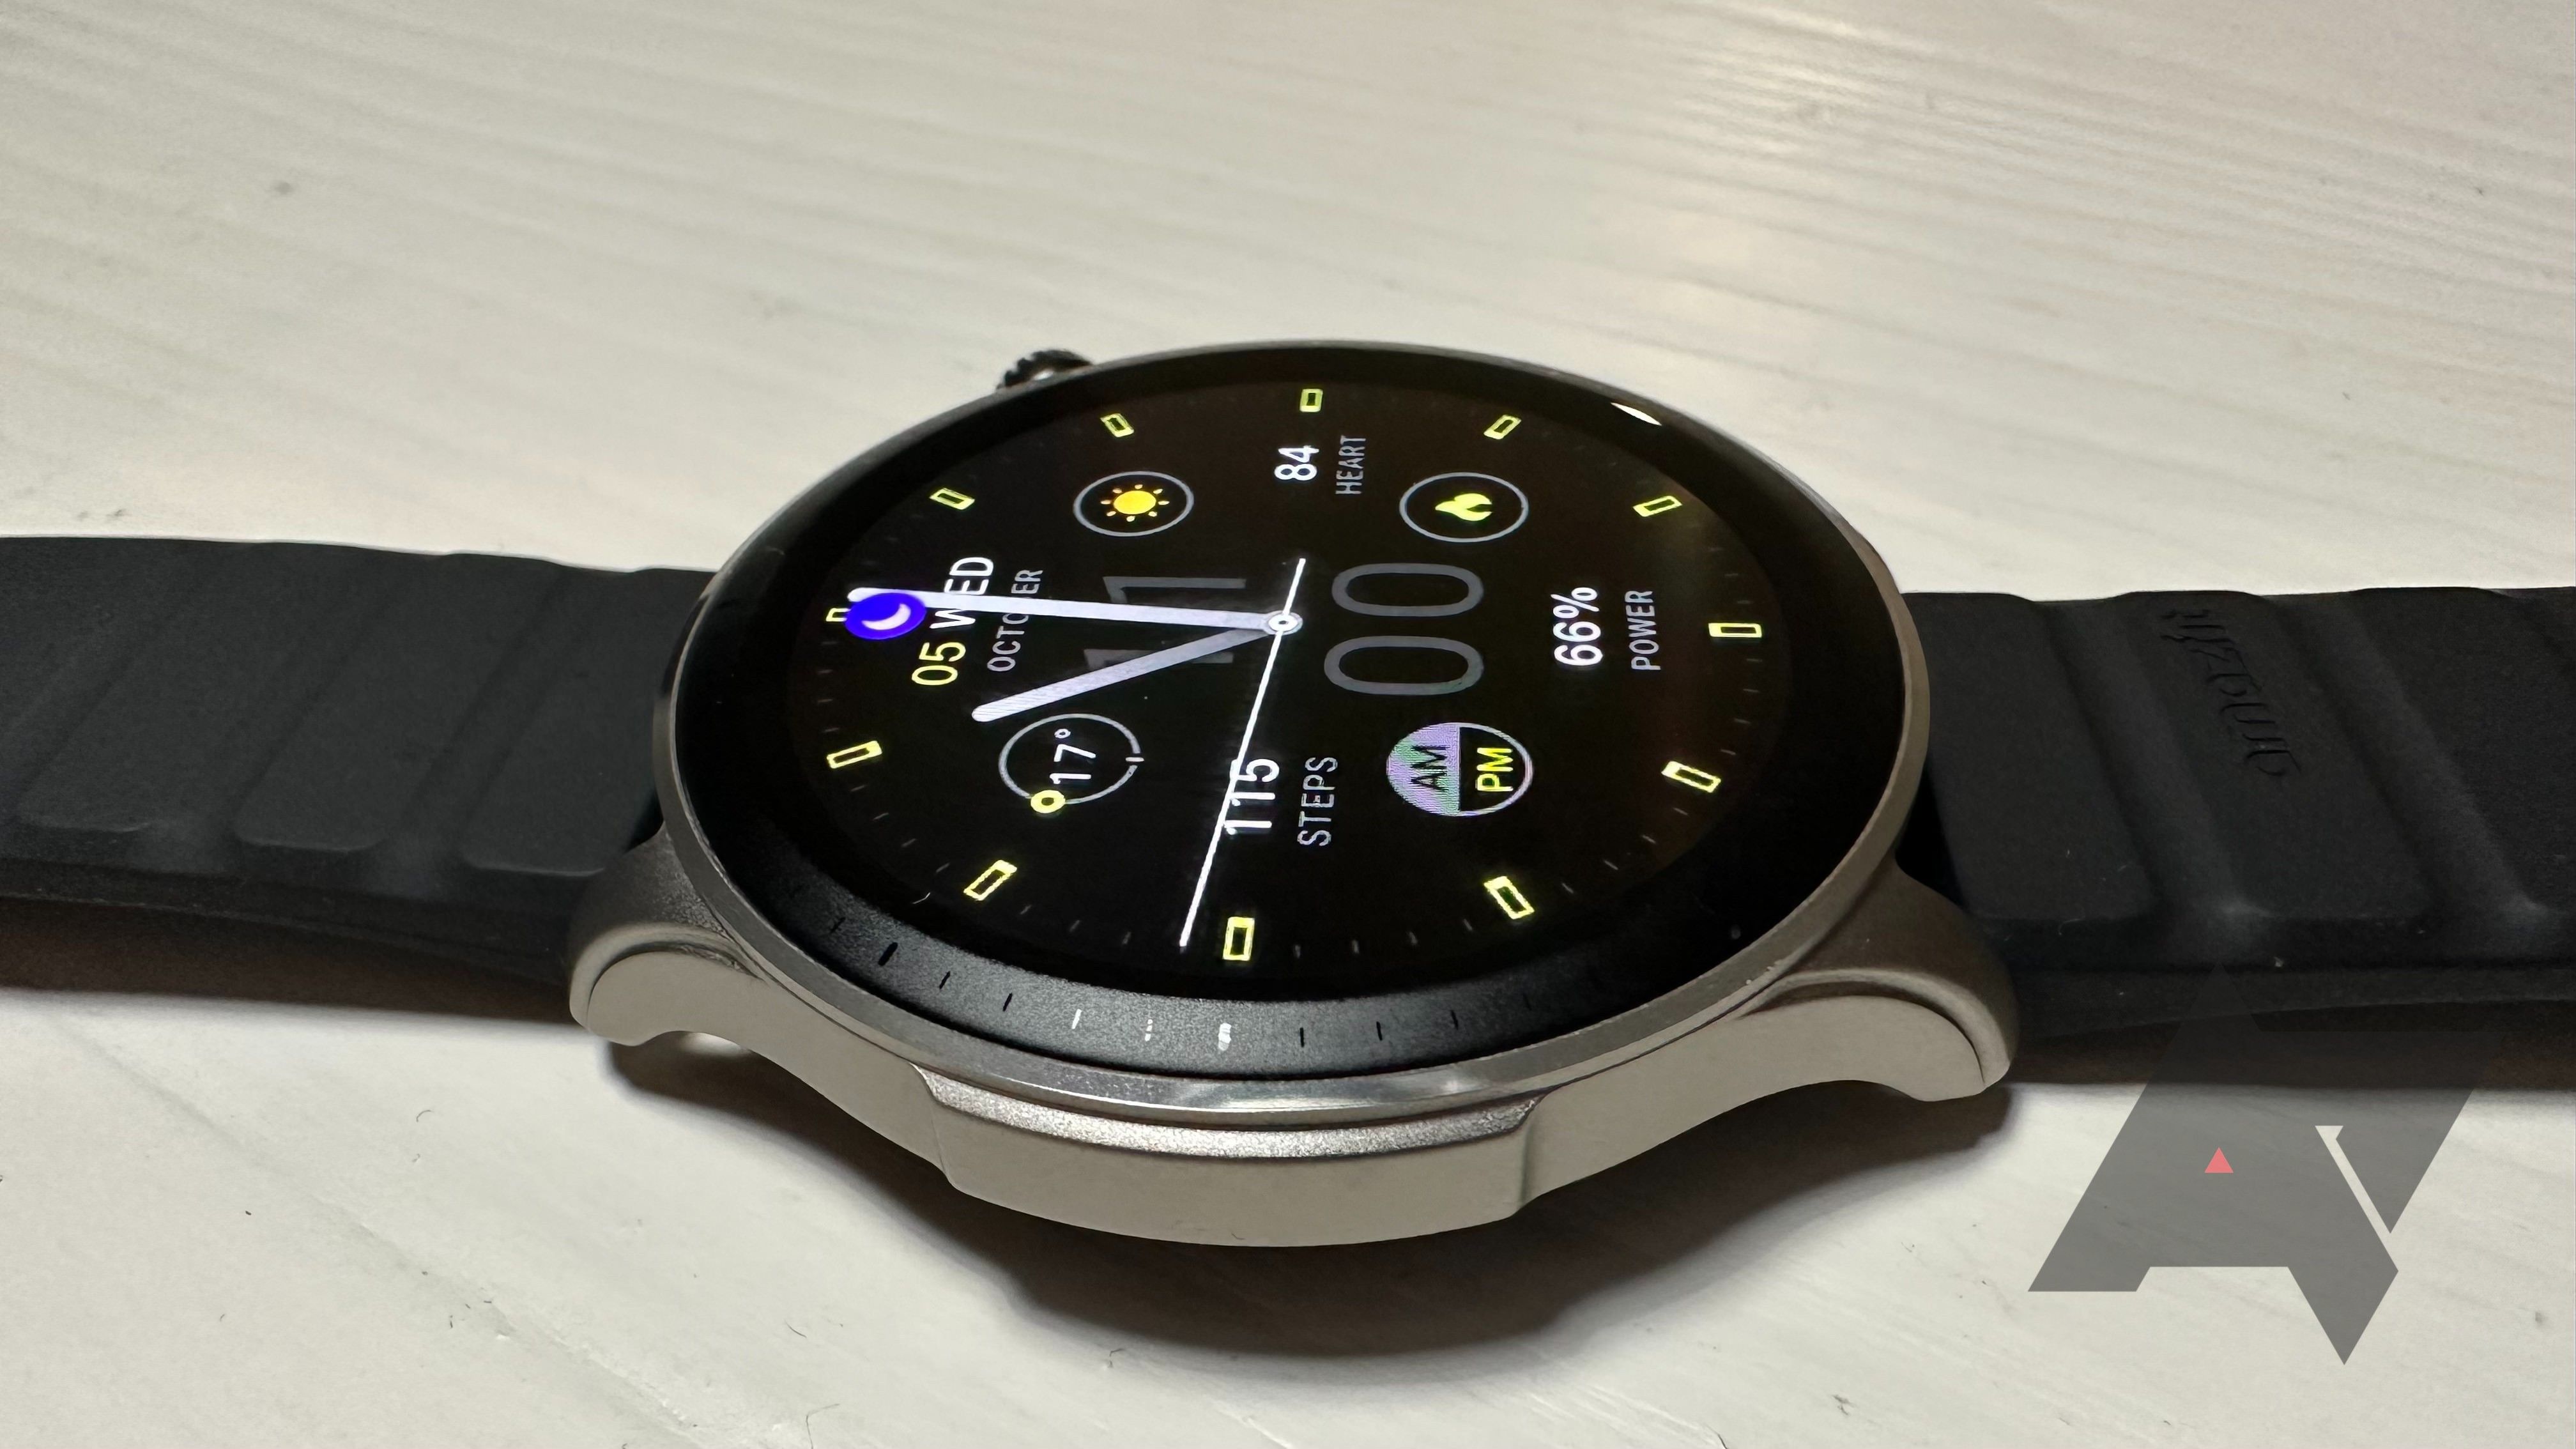 Amazfit's GTR 4 smartwatch, sitting on a table